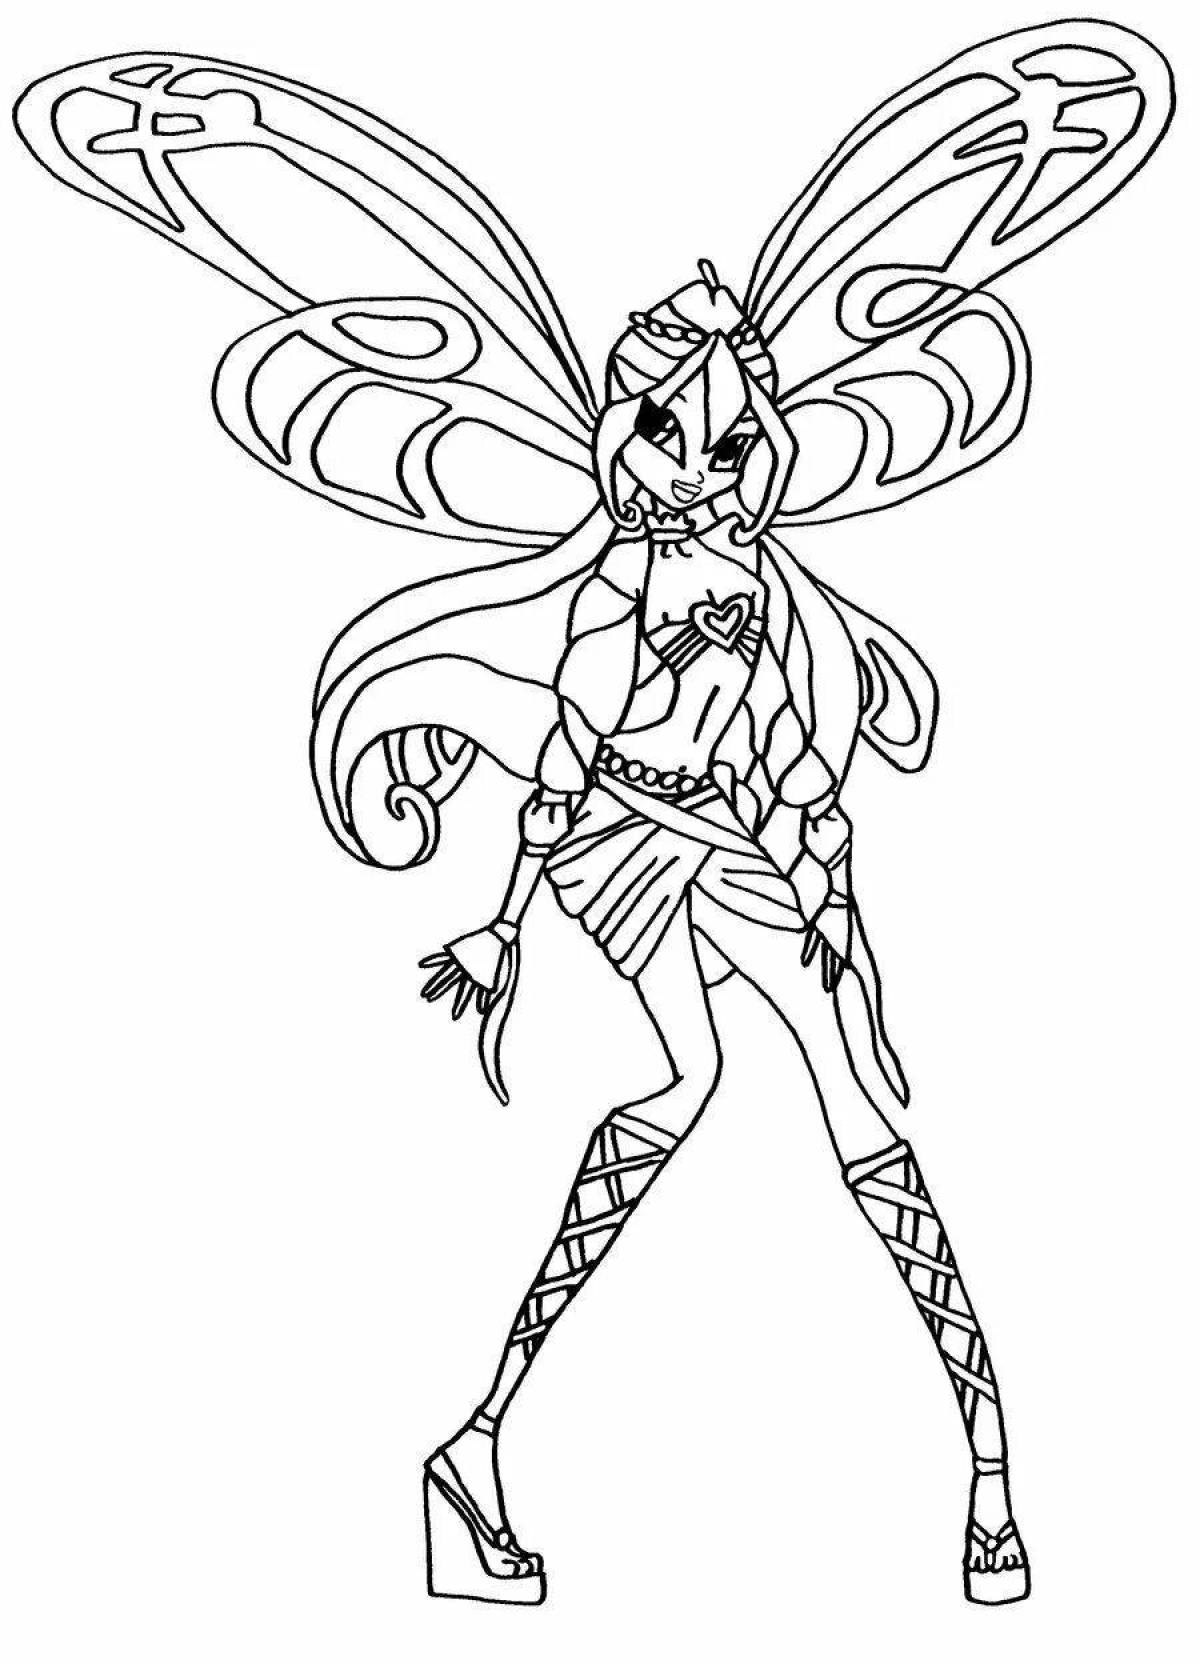 Exotic winx bloom coloring book